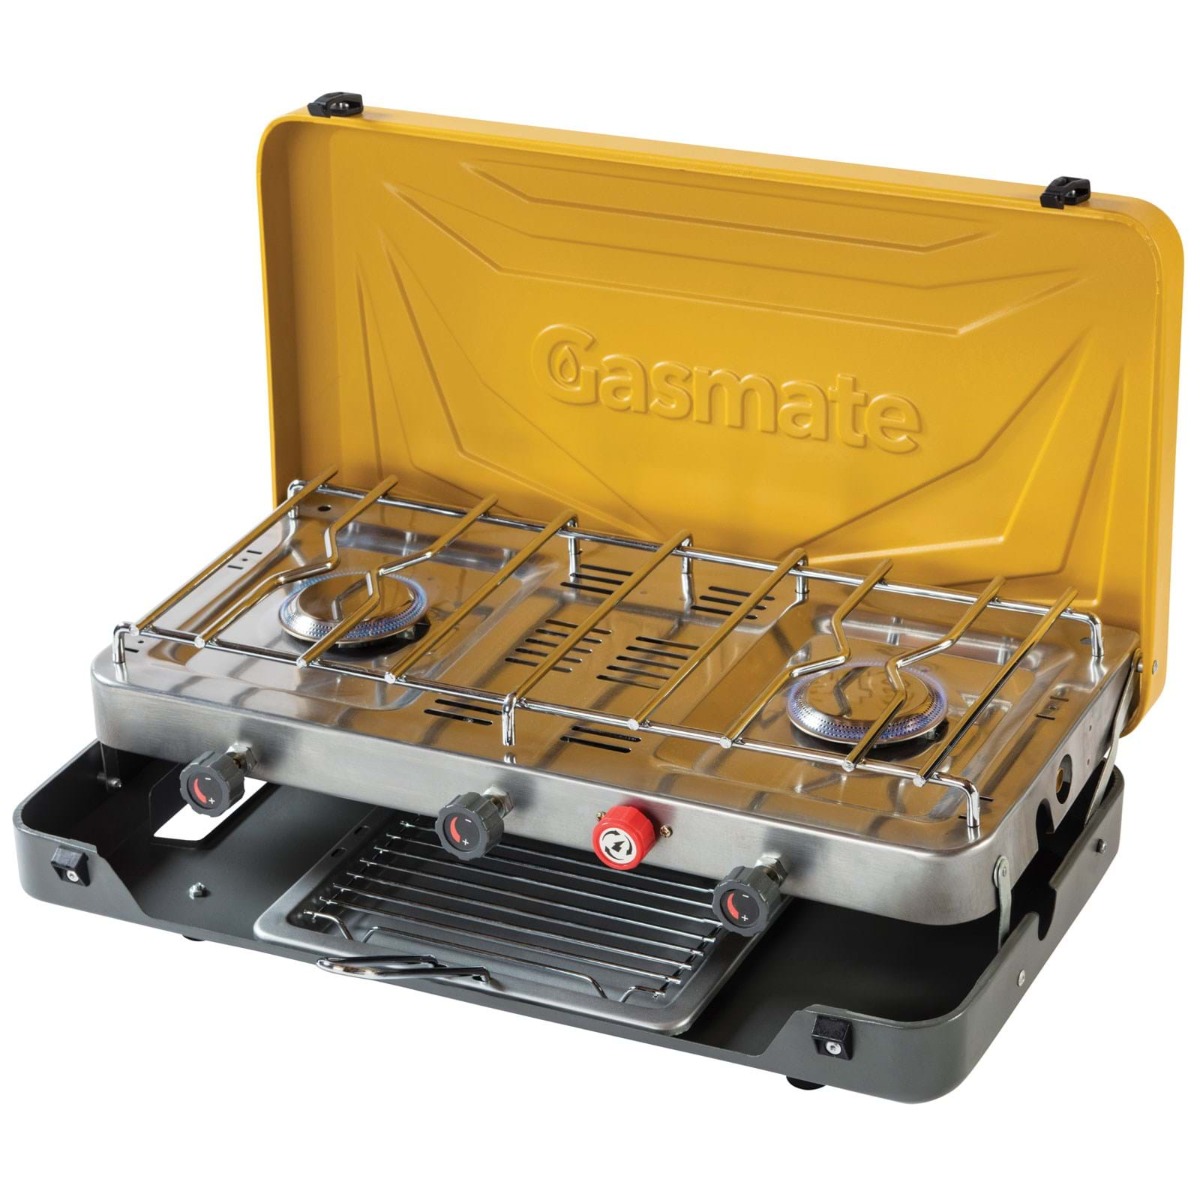 gasmate 2 BURNER STOVE WITH GRILL open